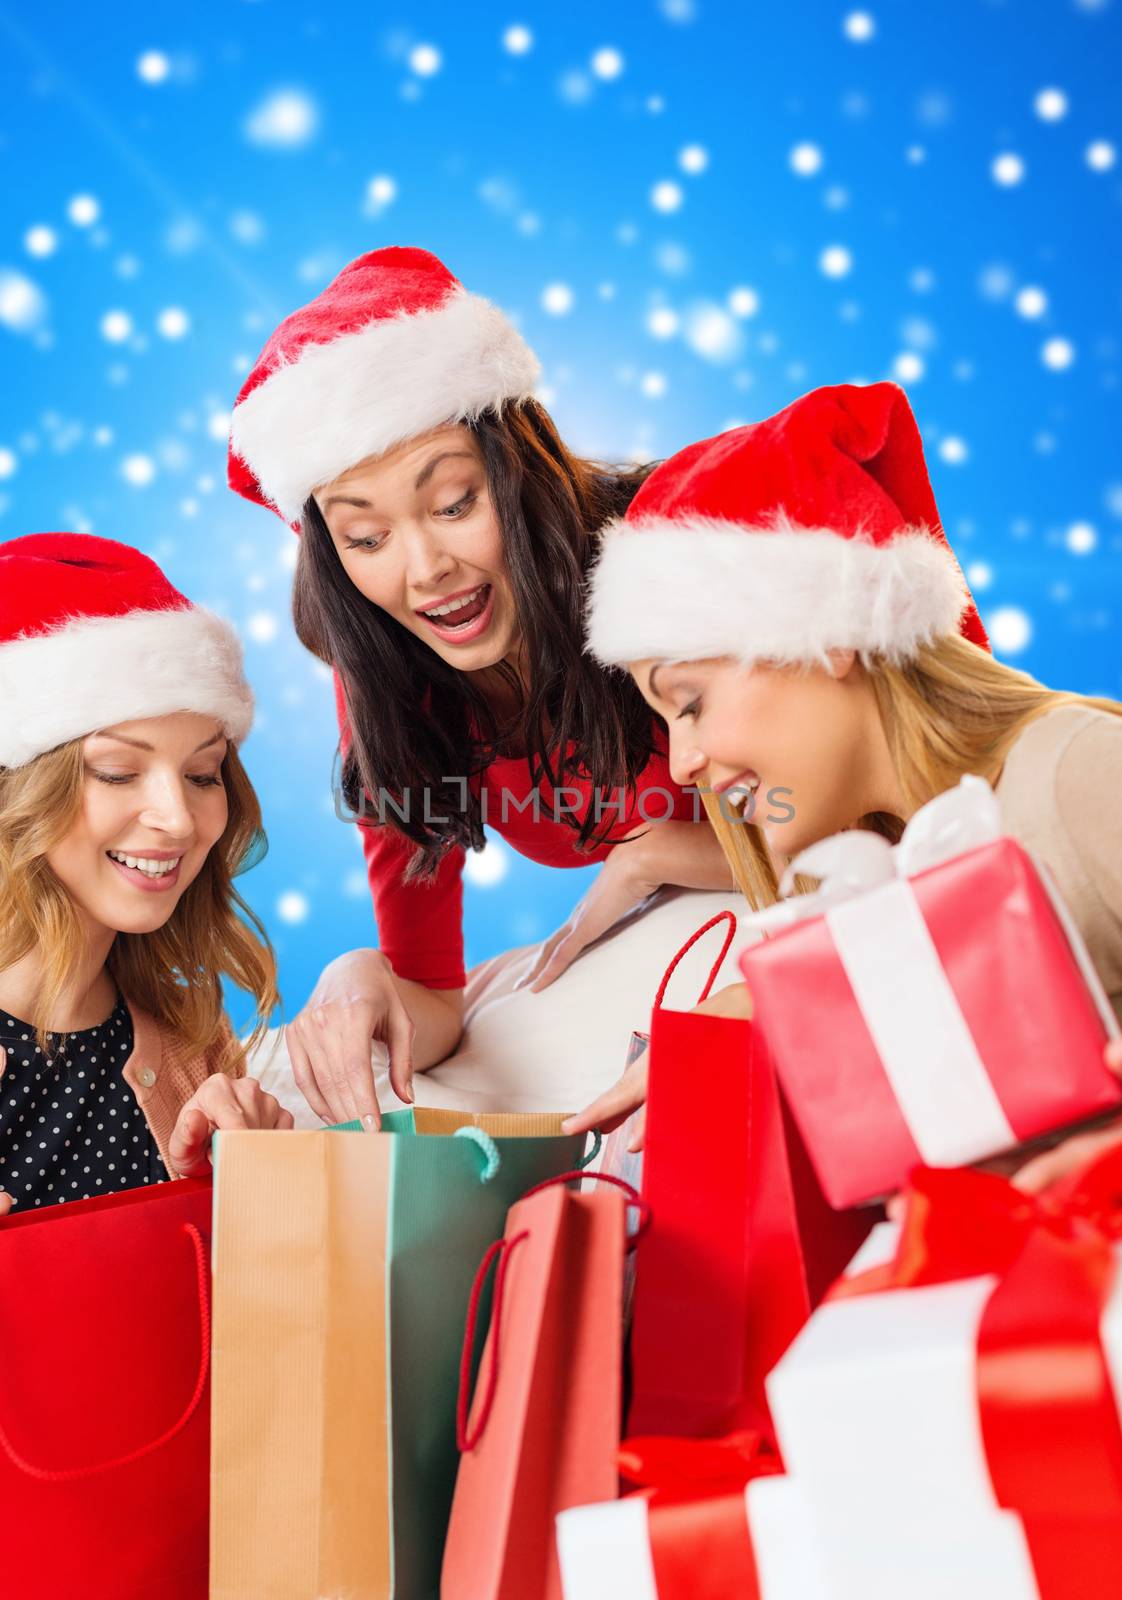 sale, winter holidays, christmas and people concept - smiling young woman in santa helper hat with gifts and shopping bags over blue snowing background